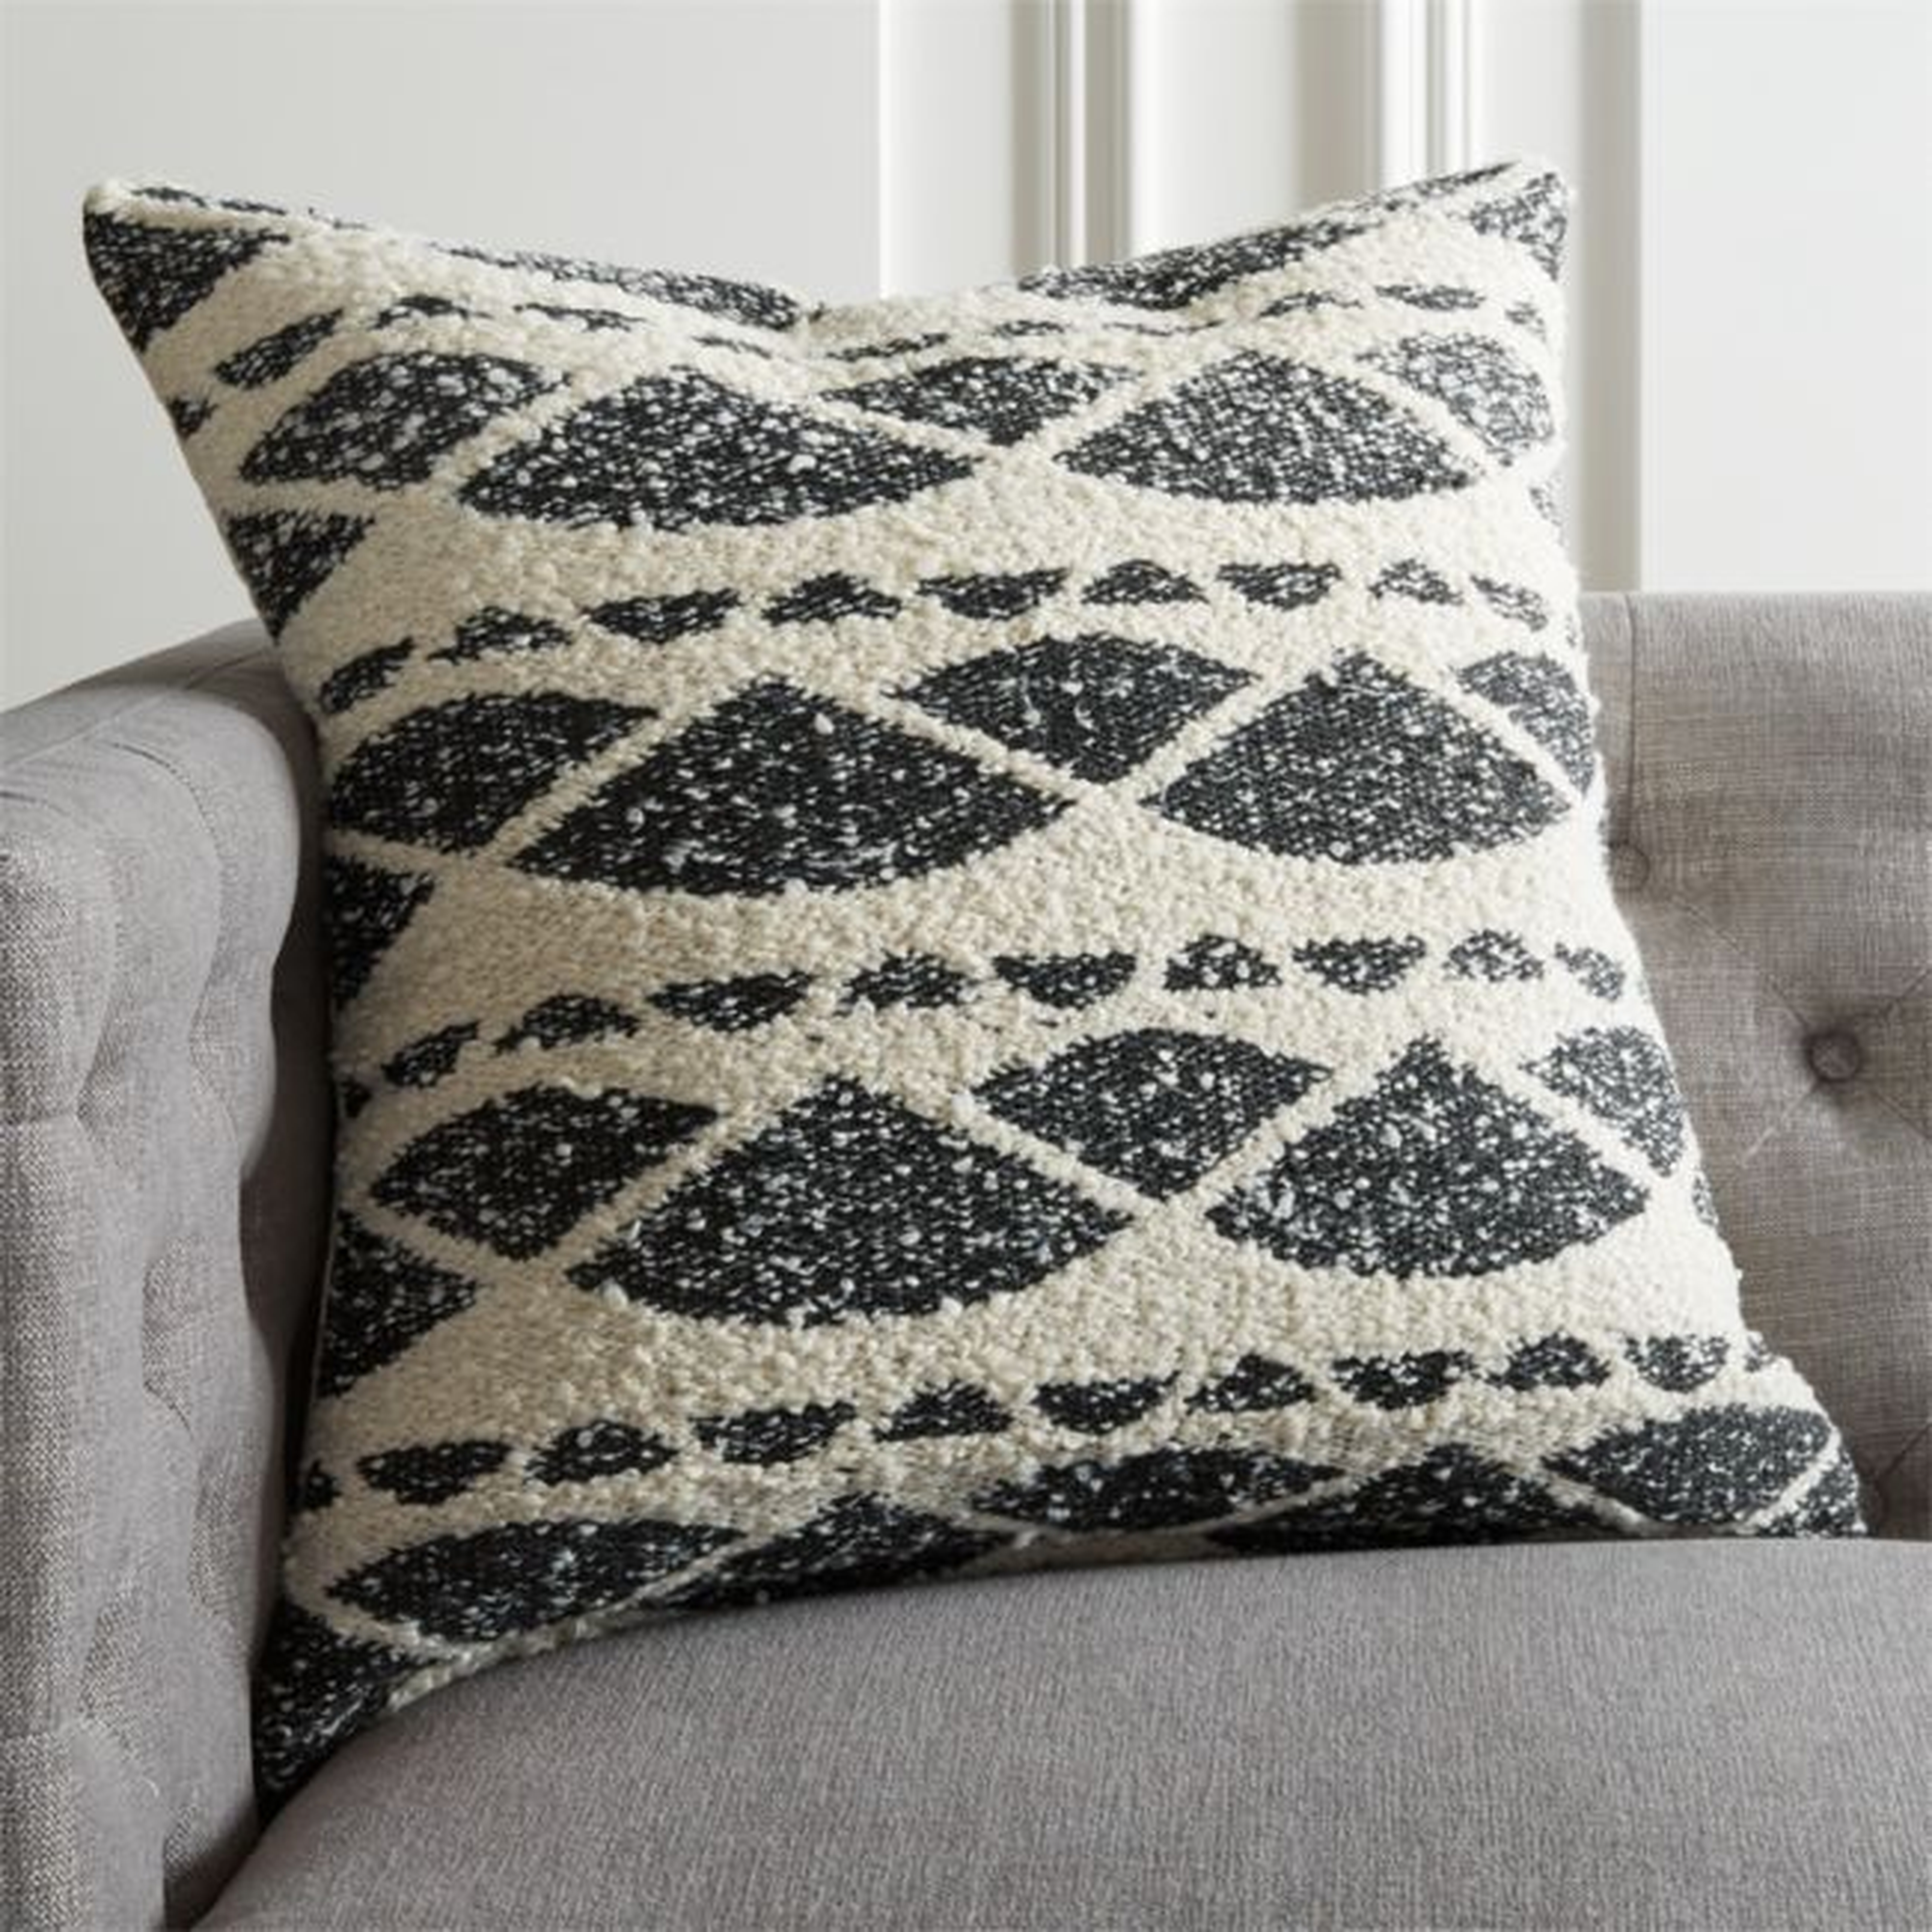 23" Hazel Black and White Boucle Pillow with Down-Alternative Insert - CB2